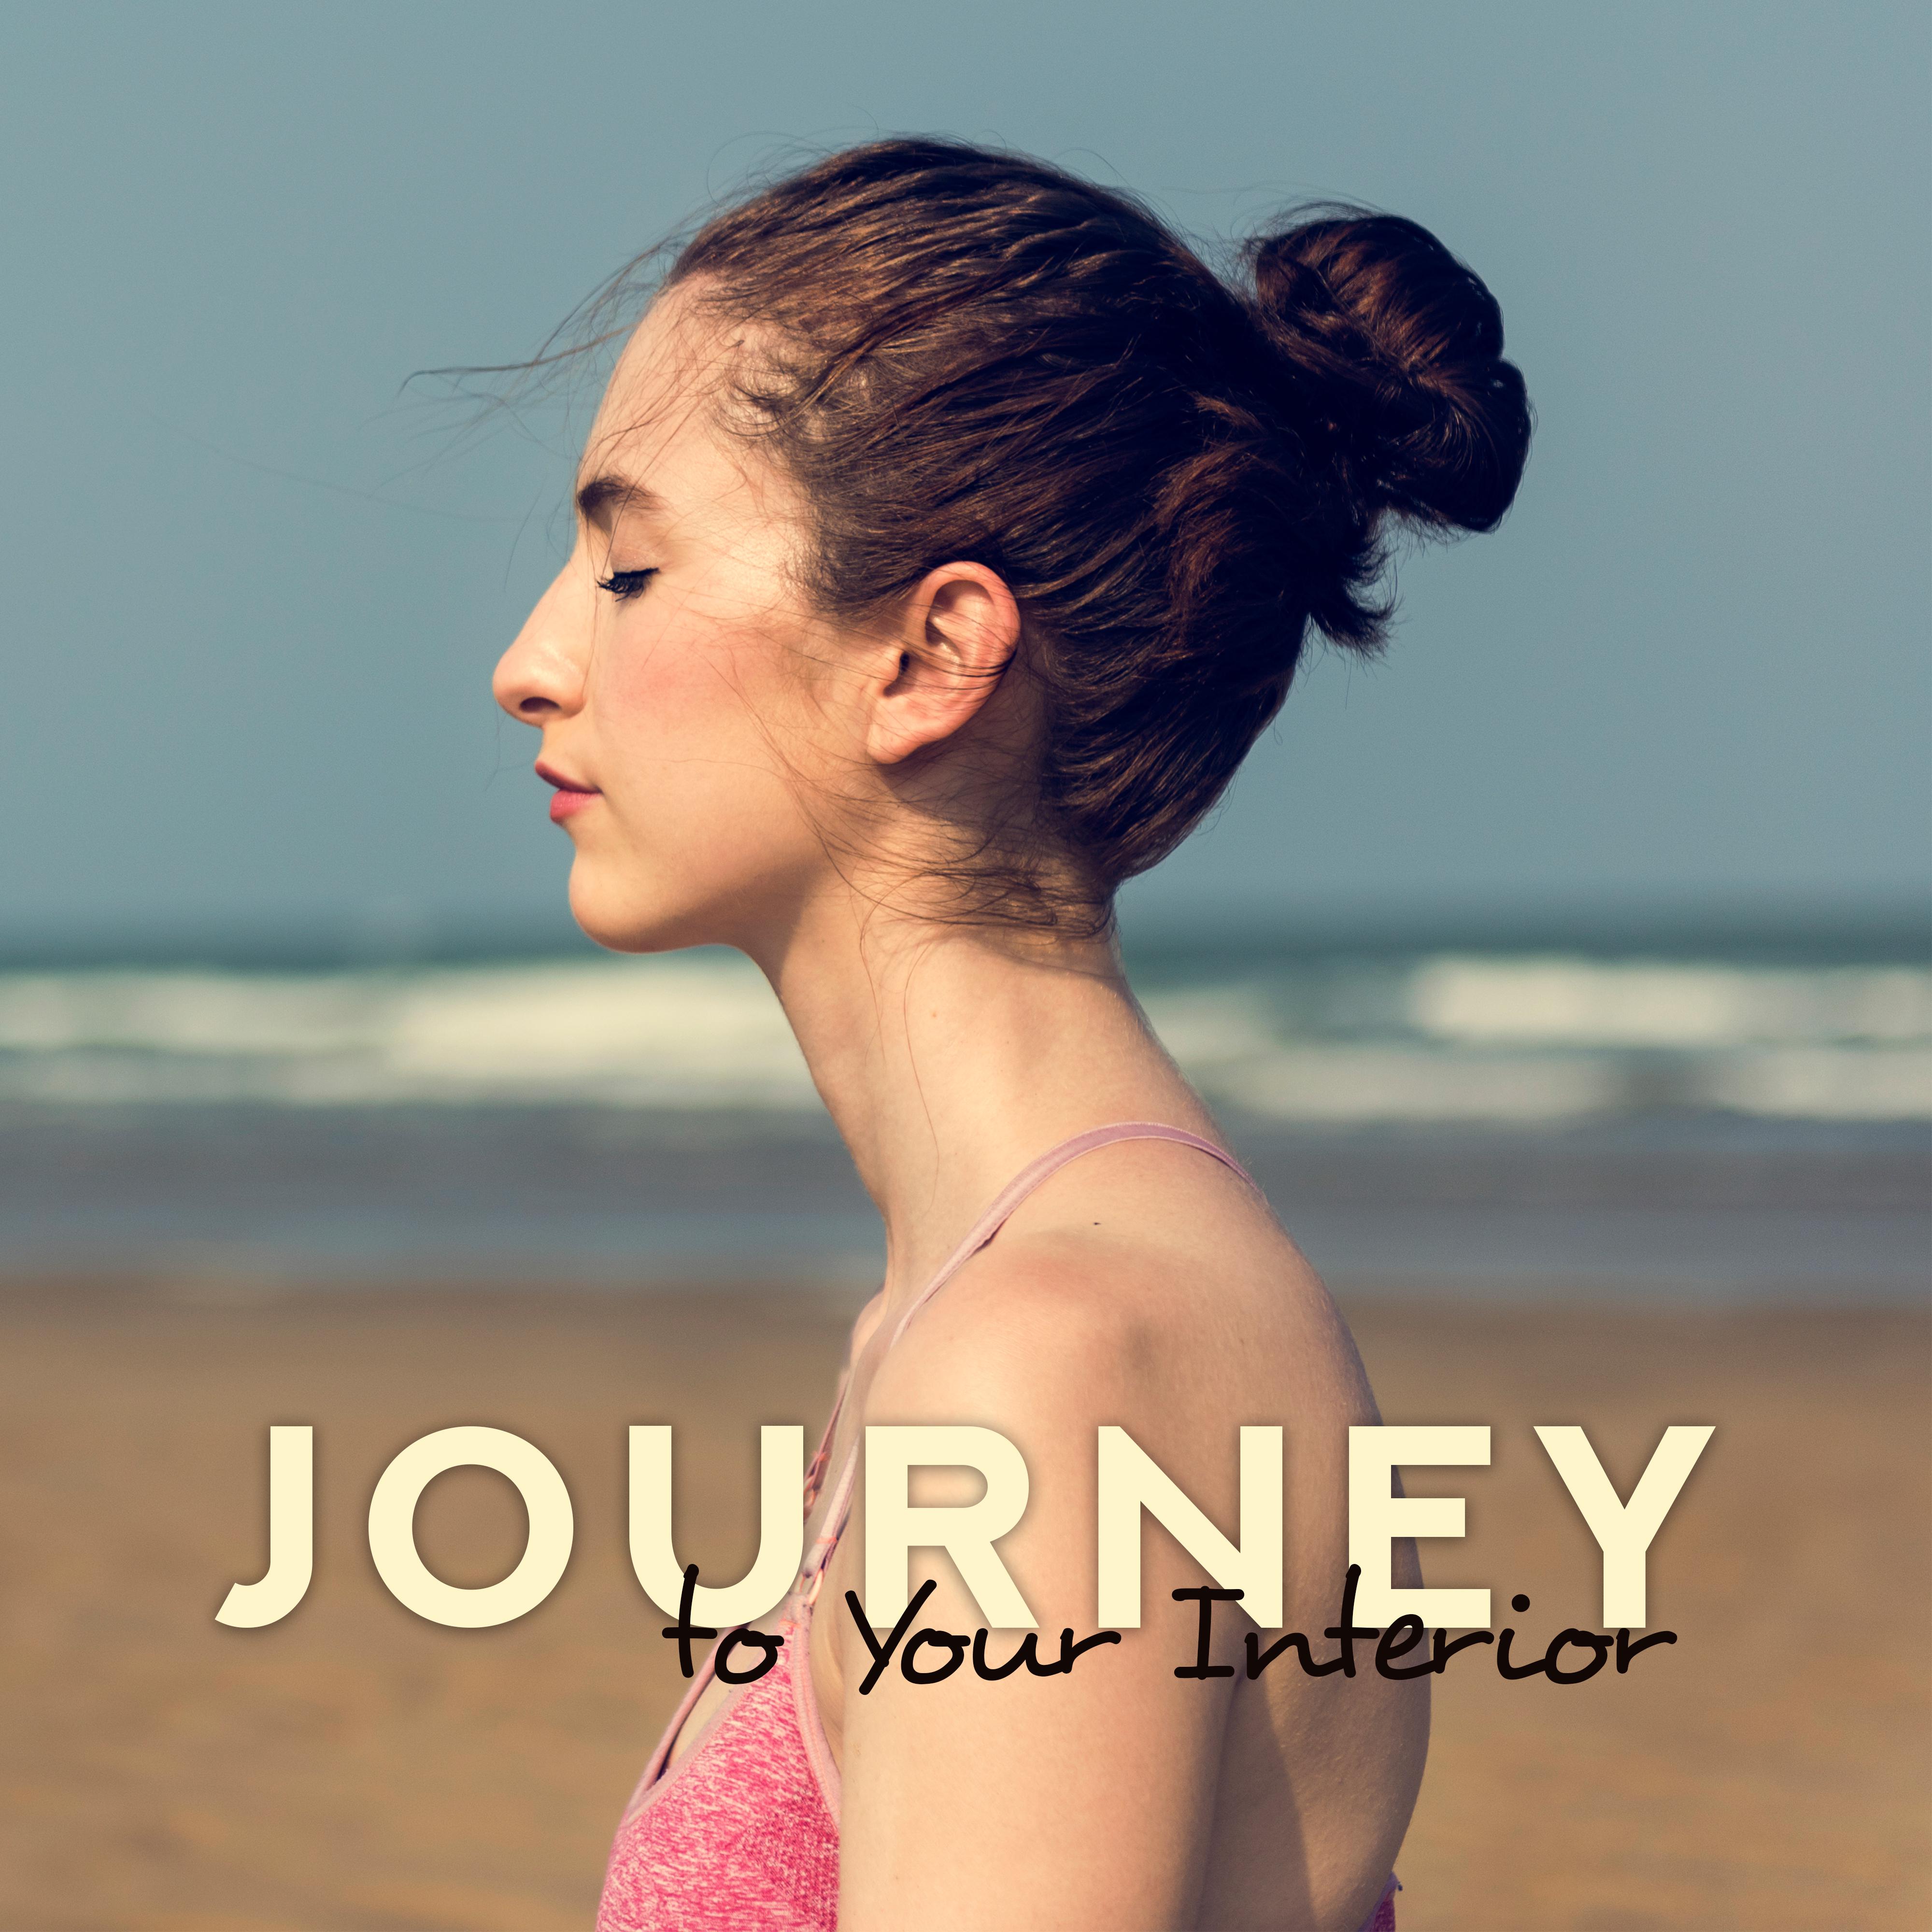 Journey to Your Interior: Music for Meditation, Melodies of Nature, Soothing Music for Listening, Rest and Relaxation, Blissful Moments of Peace and Silence